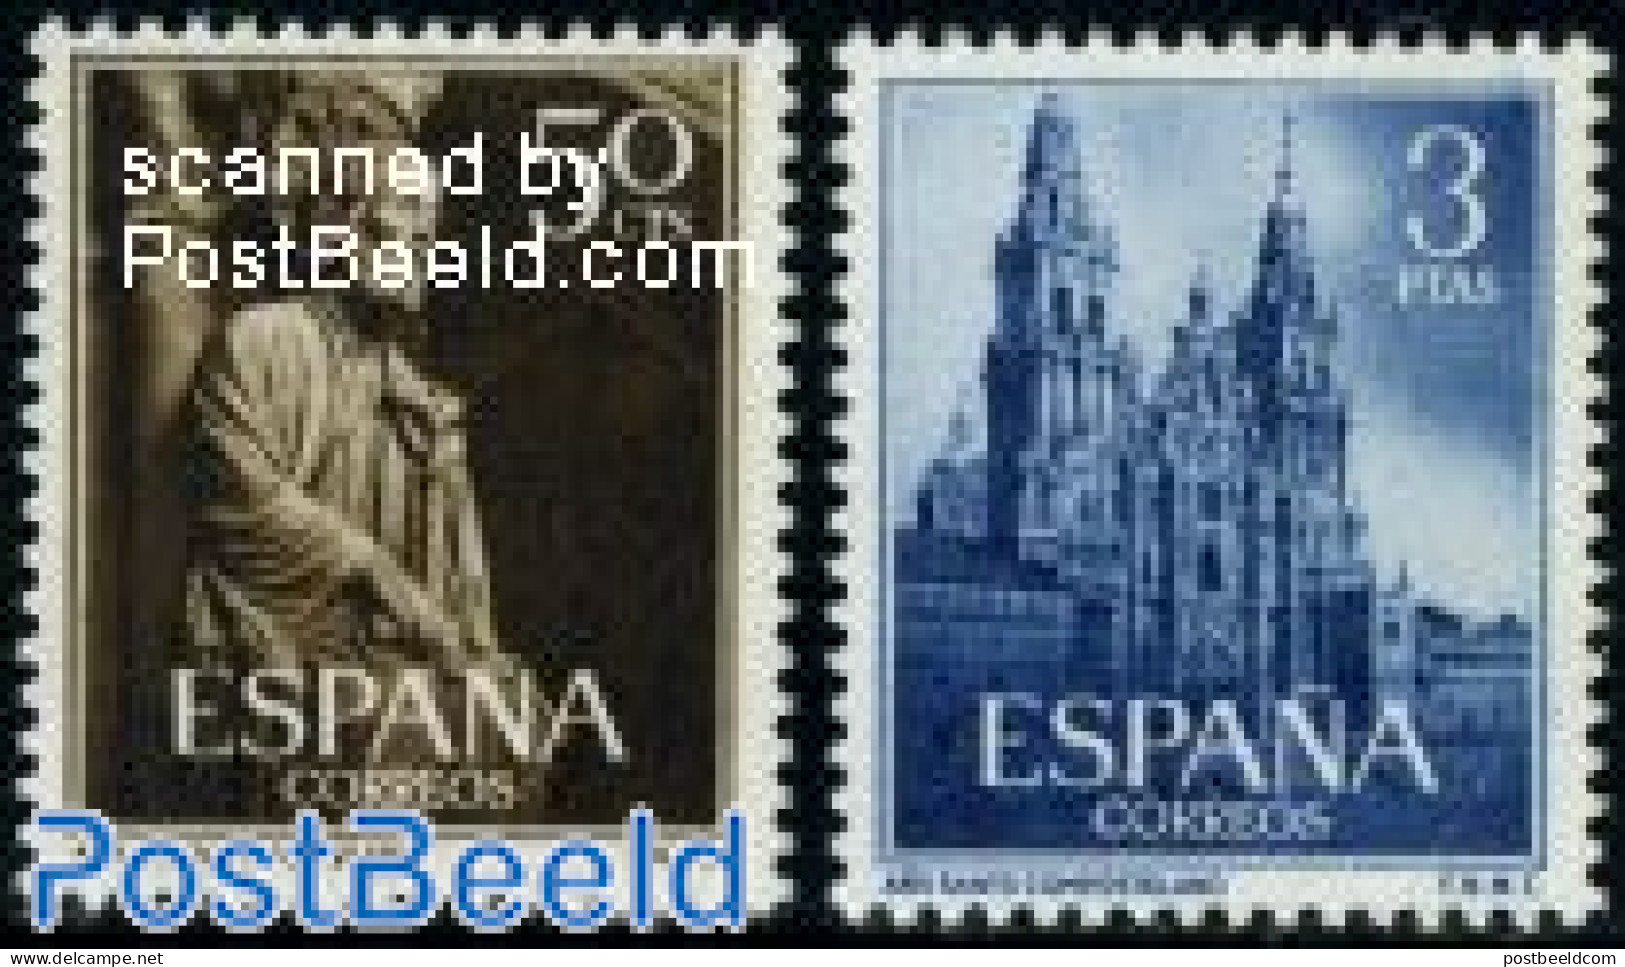 Spain 1954 Holy Year 2v, Mint NH, Religion - Churches, Temples, Mosques, Synagogues - Nuevos